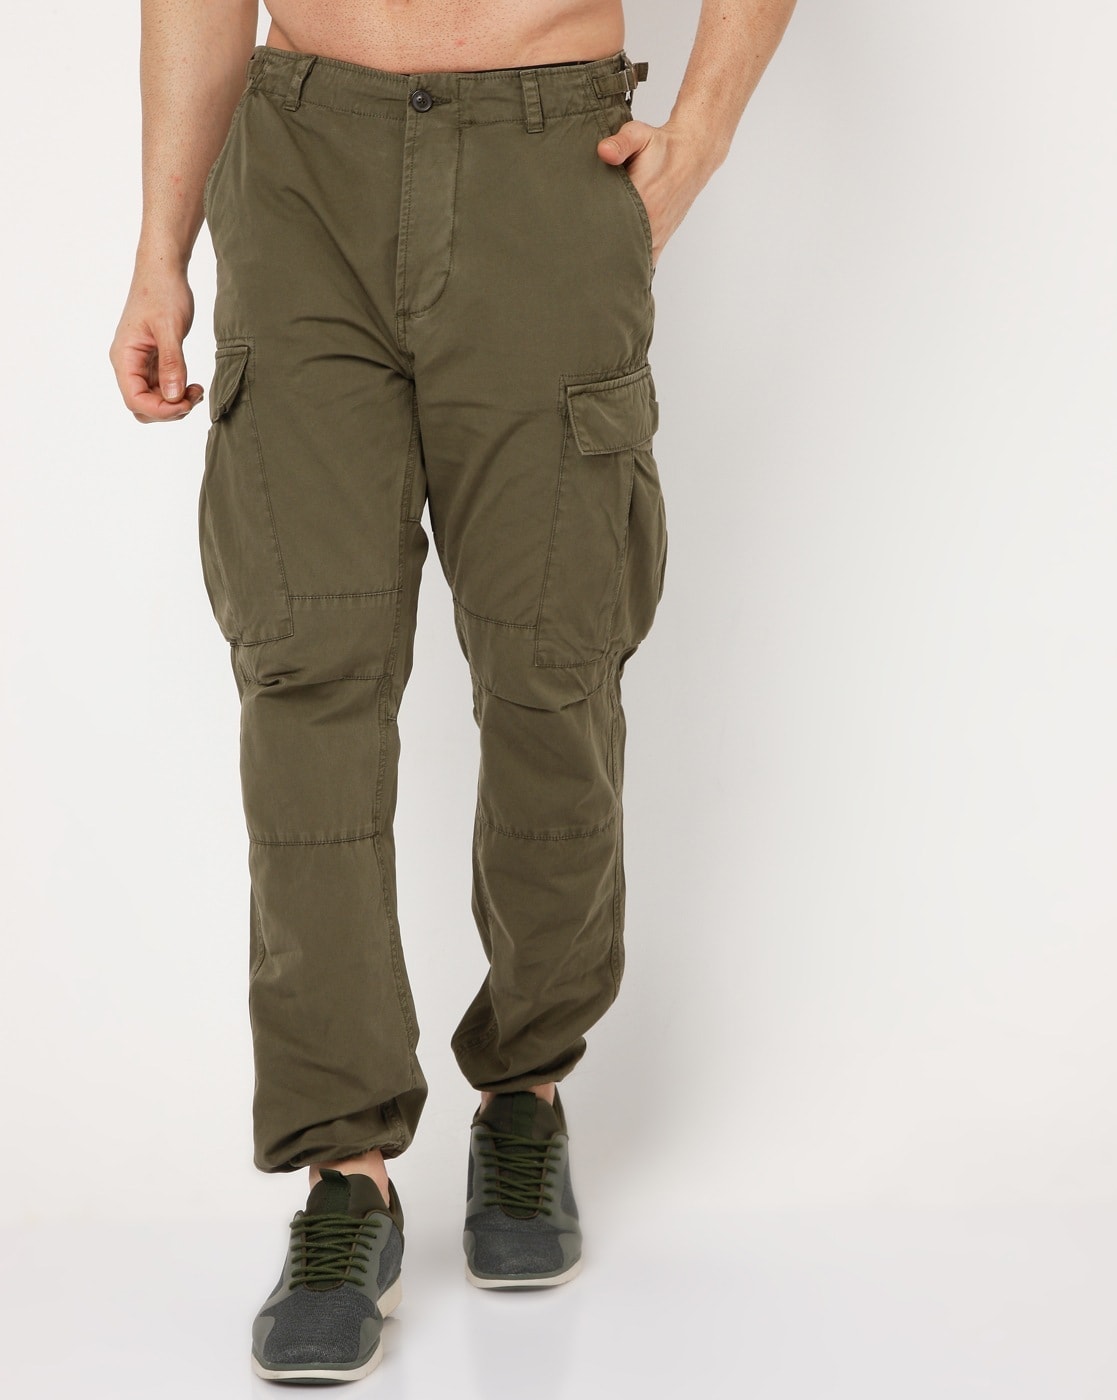 Buy Olive Green Trousers  Pants for Men by GAS Online  Ajiocom